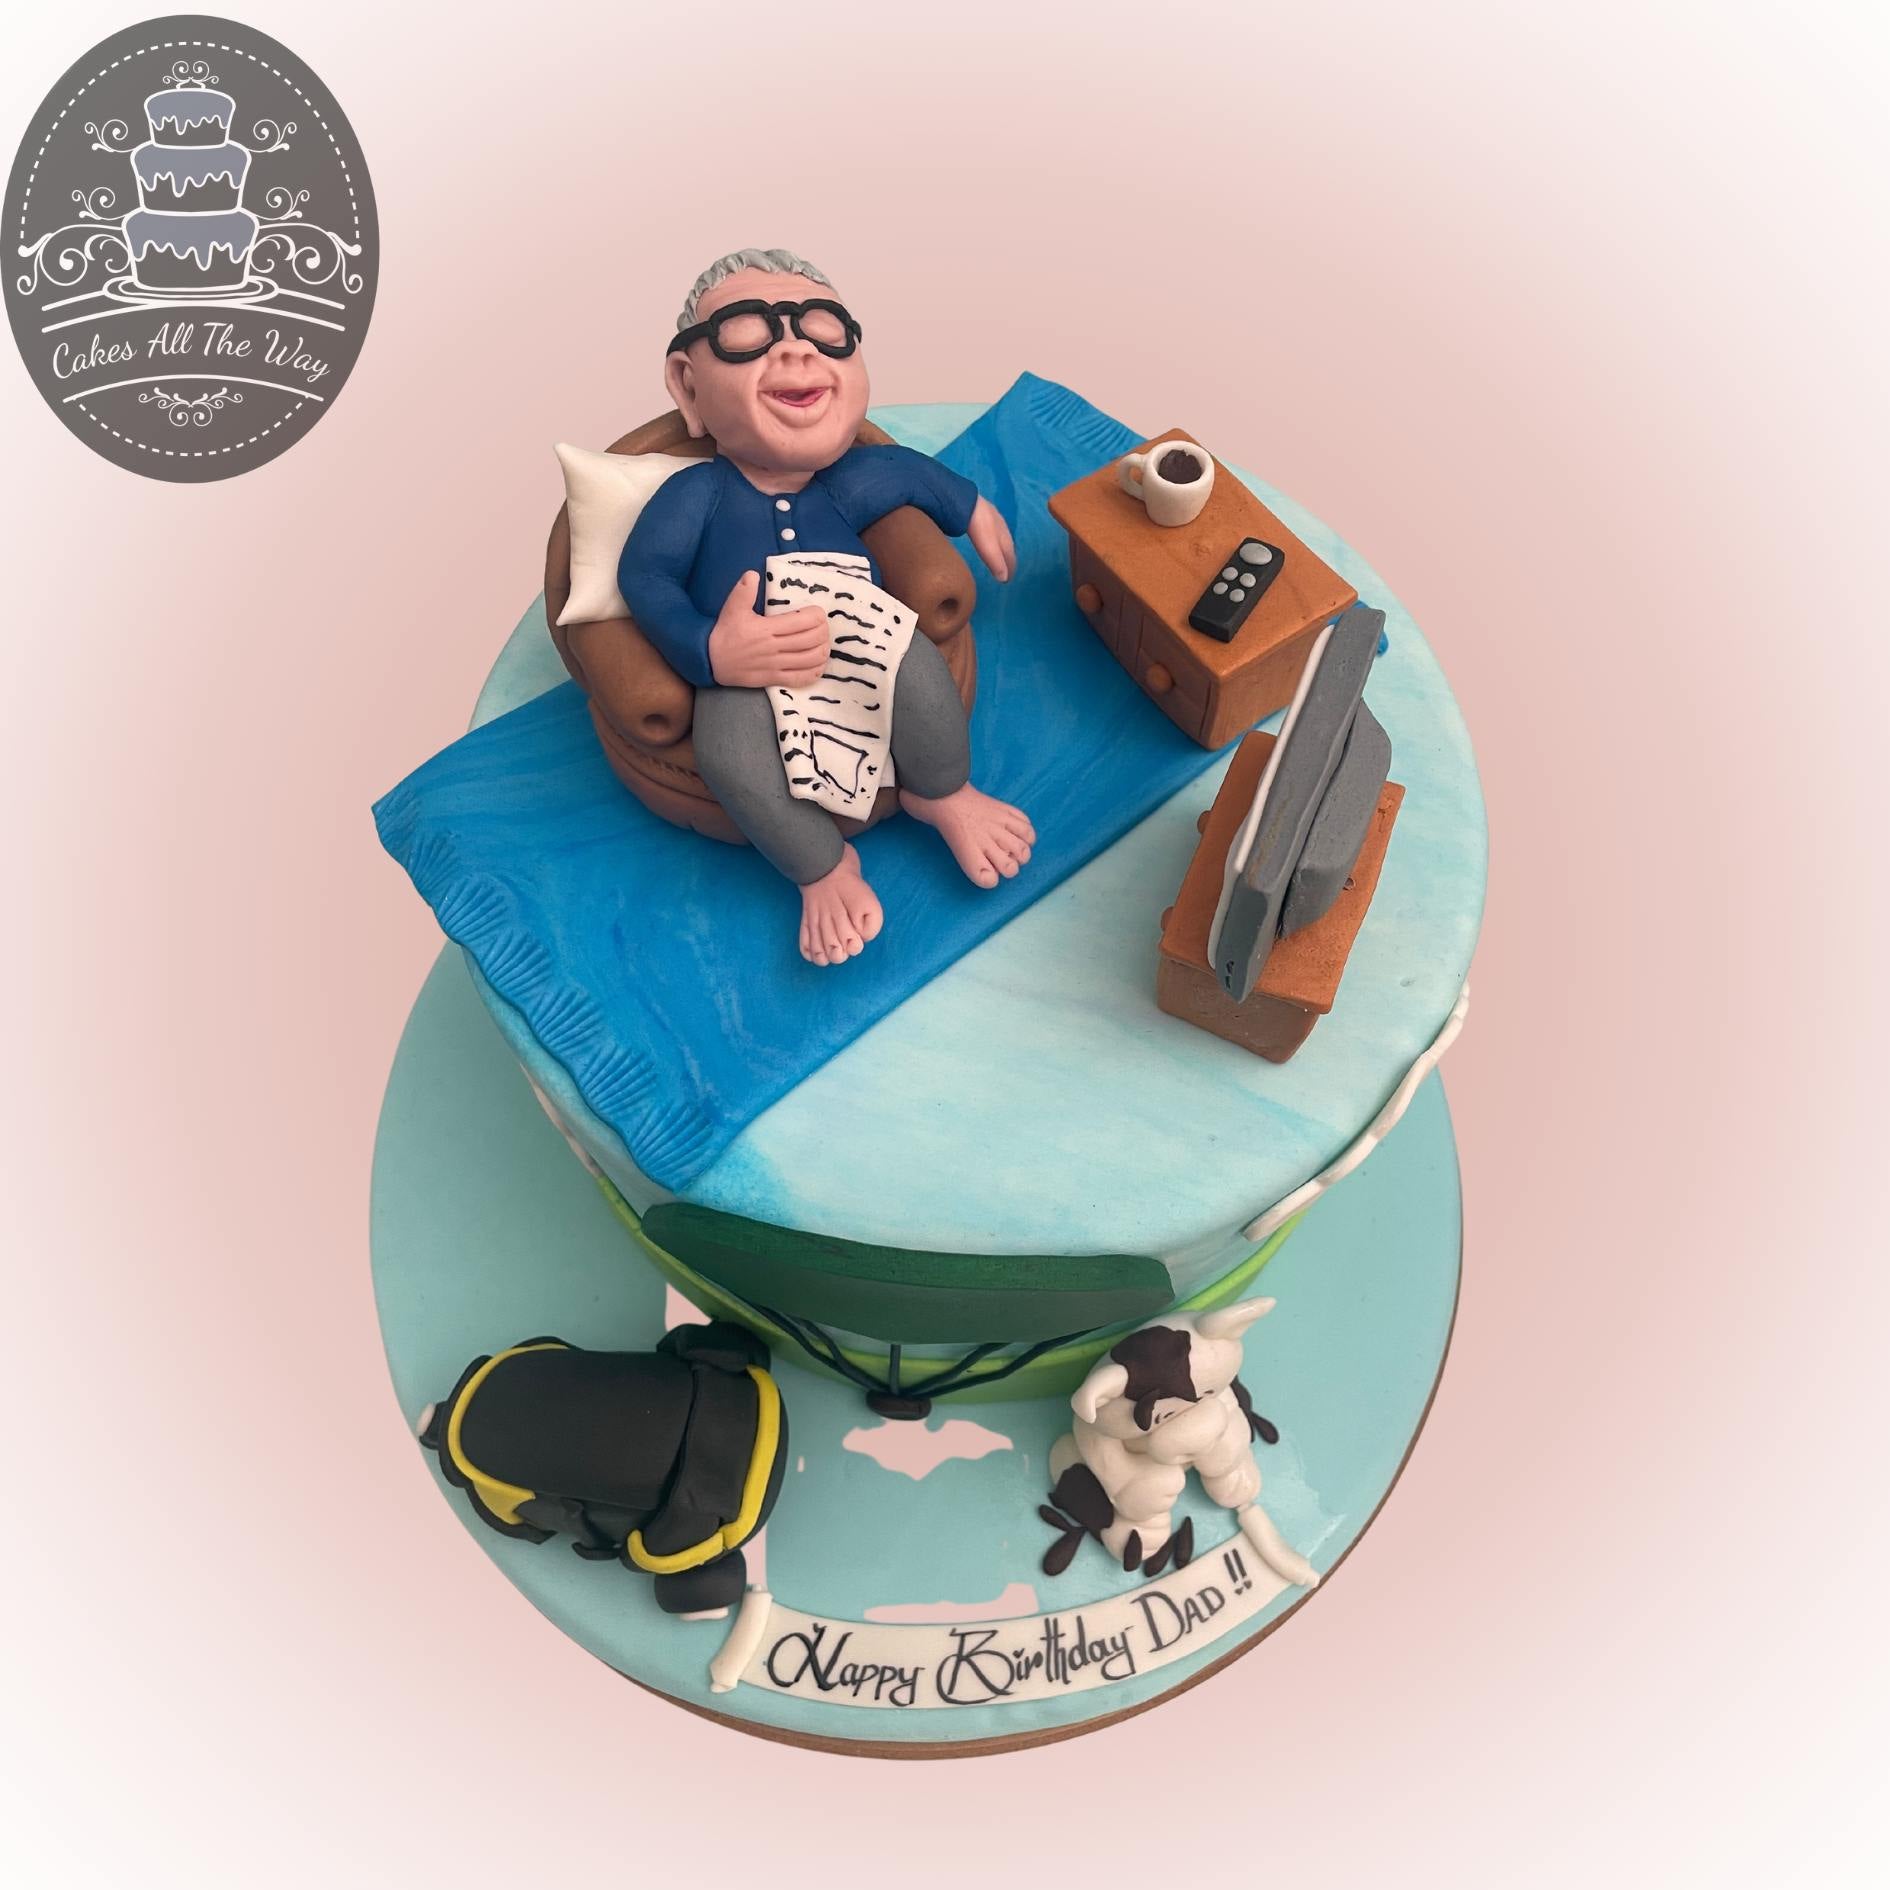 Relaxing Grandfather Theme Cake